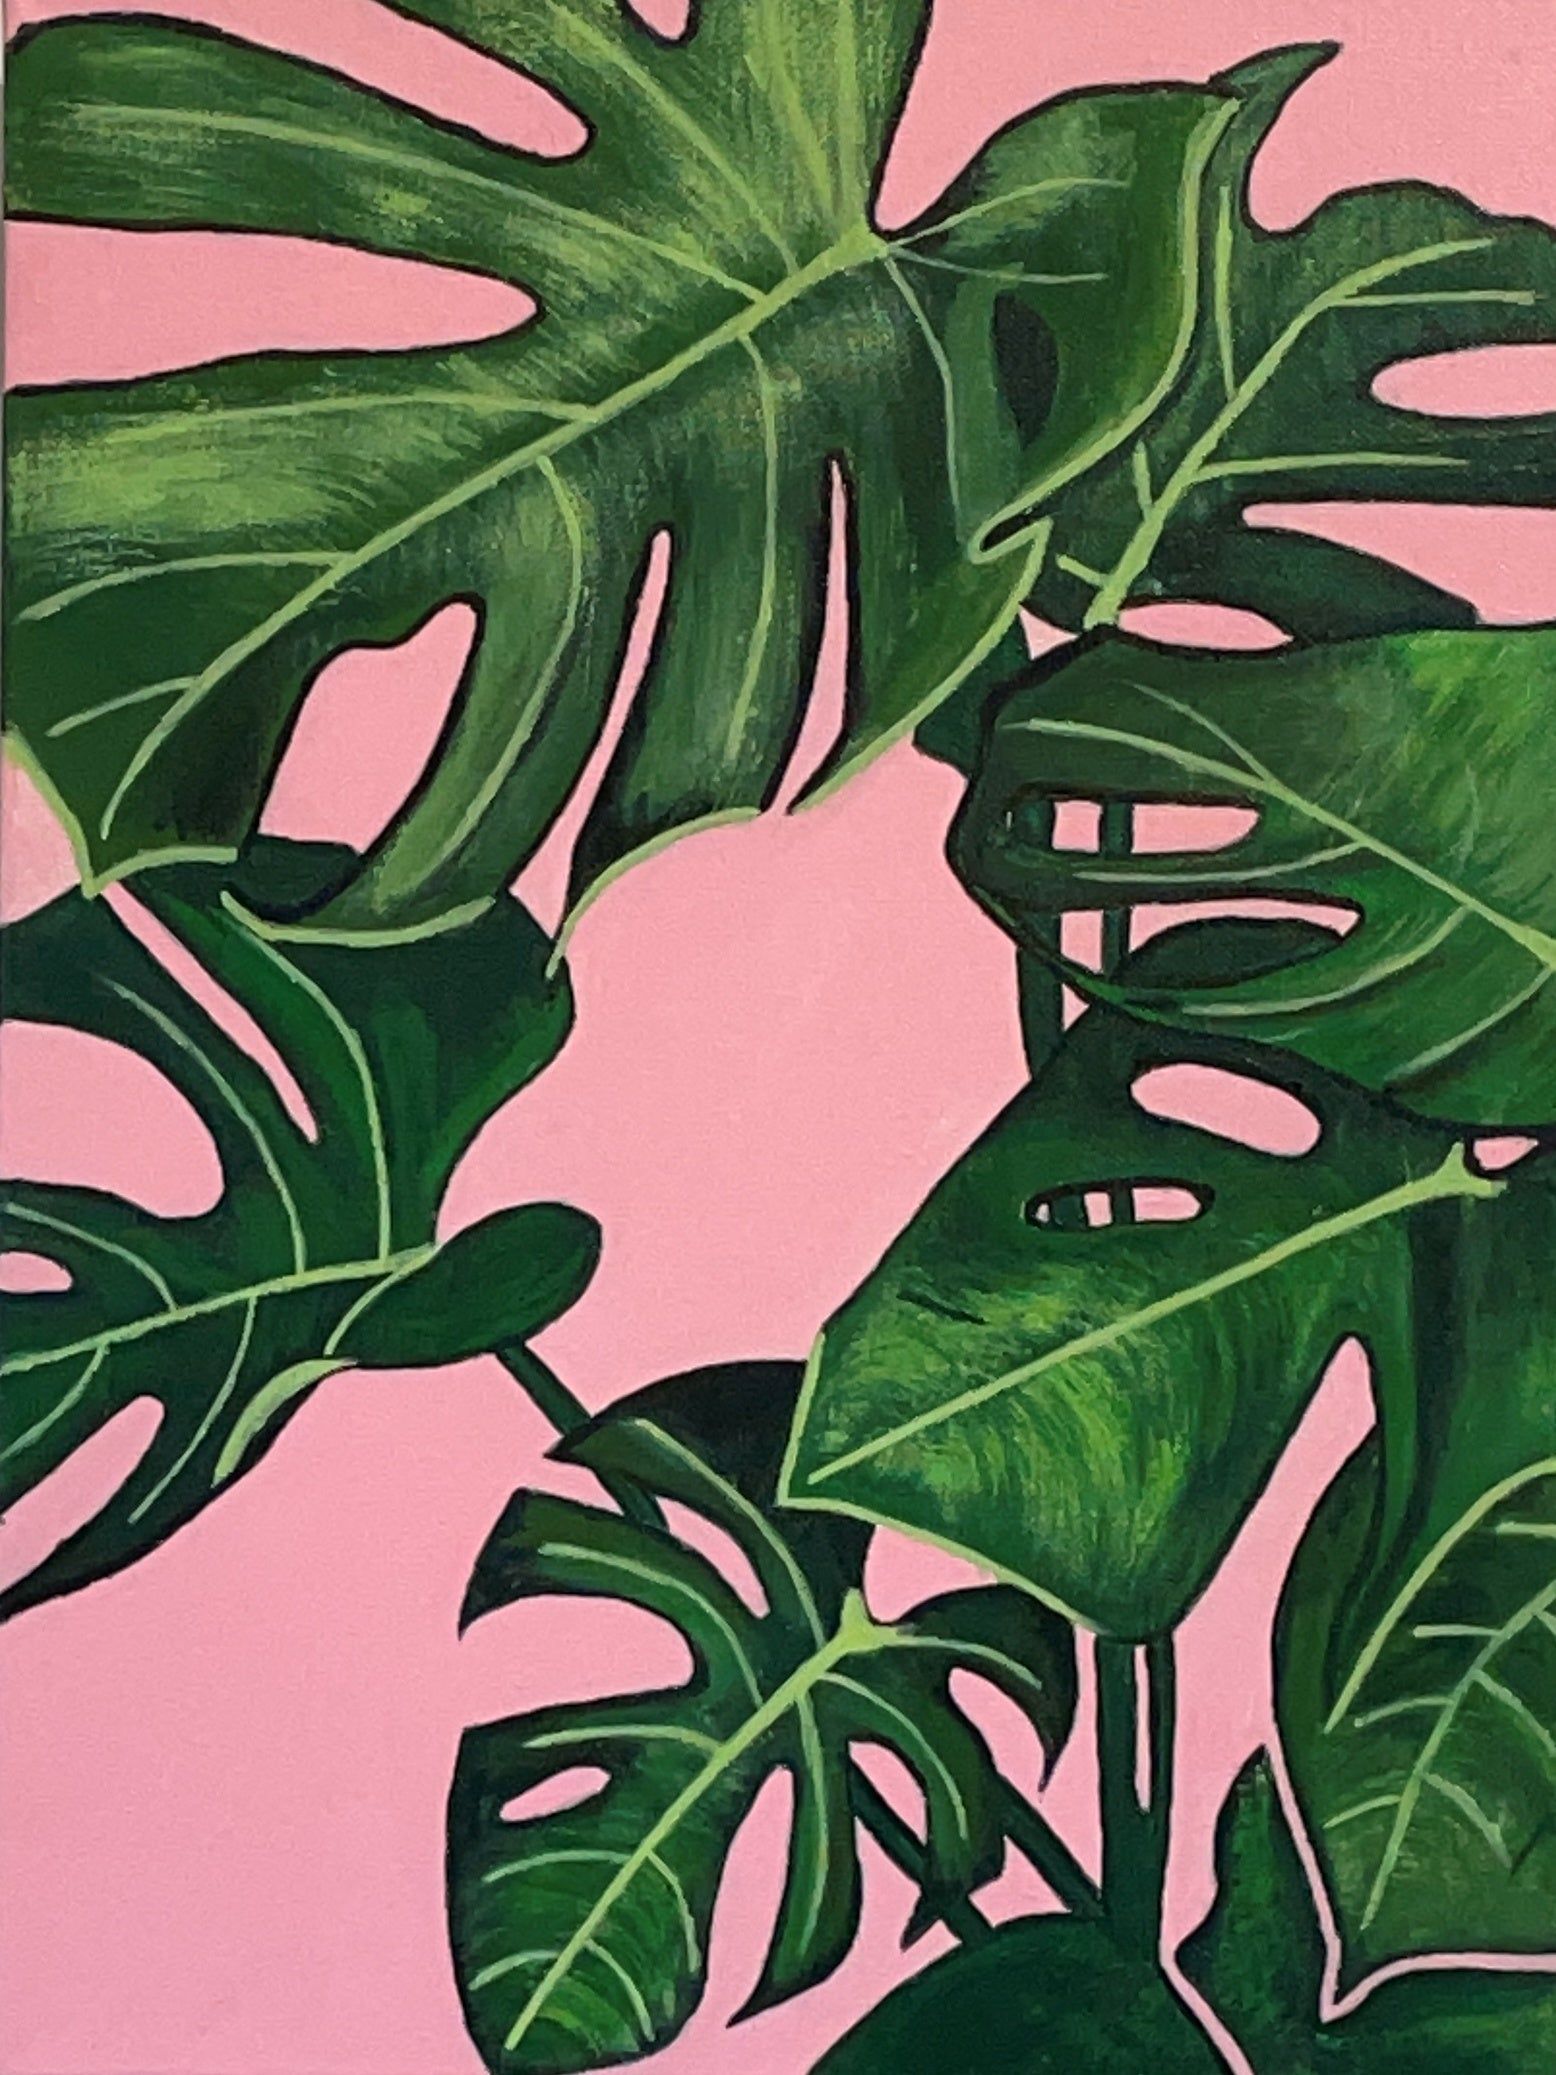 A painting of a monstera plant against a pink background - Monstera